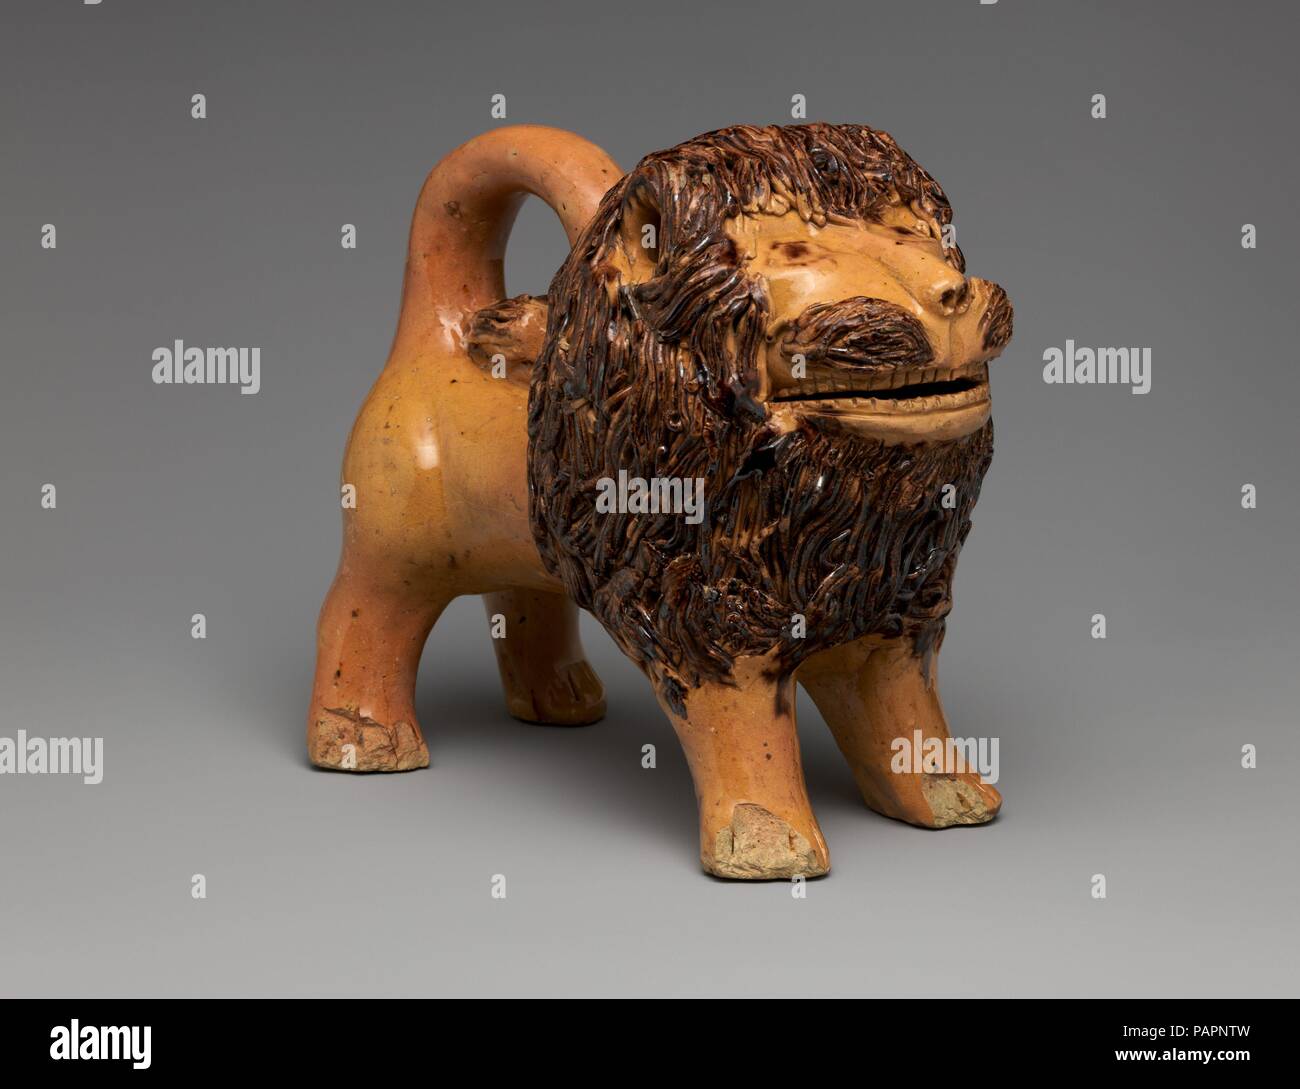 Figure of a Lion. Artist: John Bell (American, Waynesboro, Pennsylvania, 1800-1880). Culture: American. Dimensions: Height: 7 1/2 in. (19.1 cm). Date: 1845-55.  This figure of a lion is quite simply the icon of American folk art in clay. With its jaunty stance and naïve half-smile, it exhibits a high degree of charming playfulness and whimsy. Made by John Bell (1800-1880) of the Shenandoah Valley family of potters, this lion is one of only four earthenware examples known (and one of stoneware), all with history of ownership with members of the Bell family, suggesting that these special pieces  Stock Photo